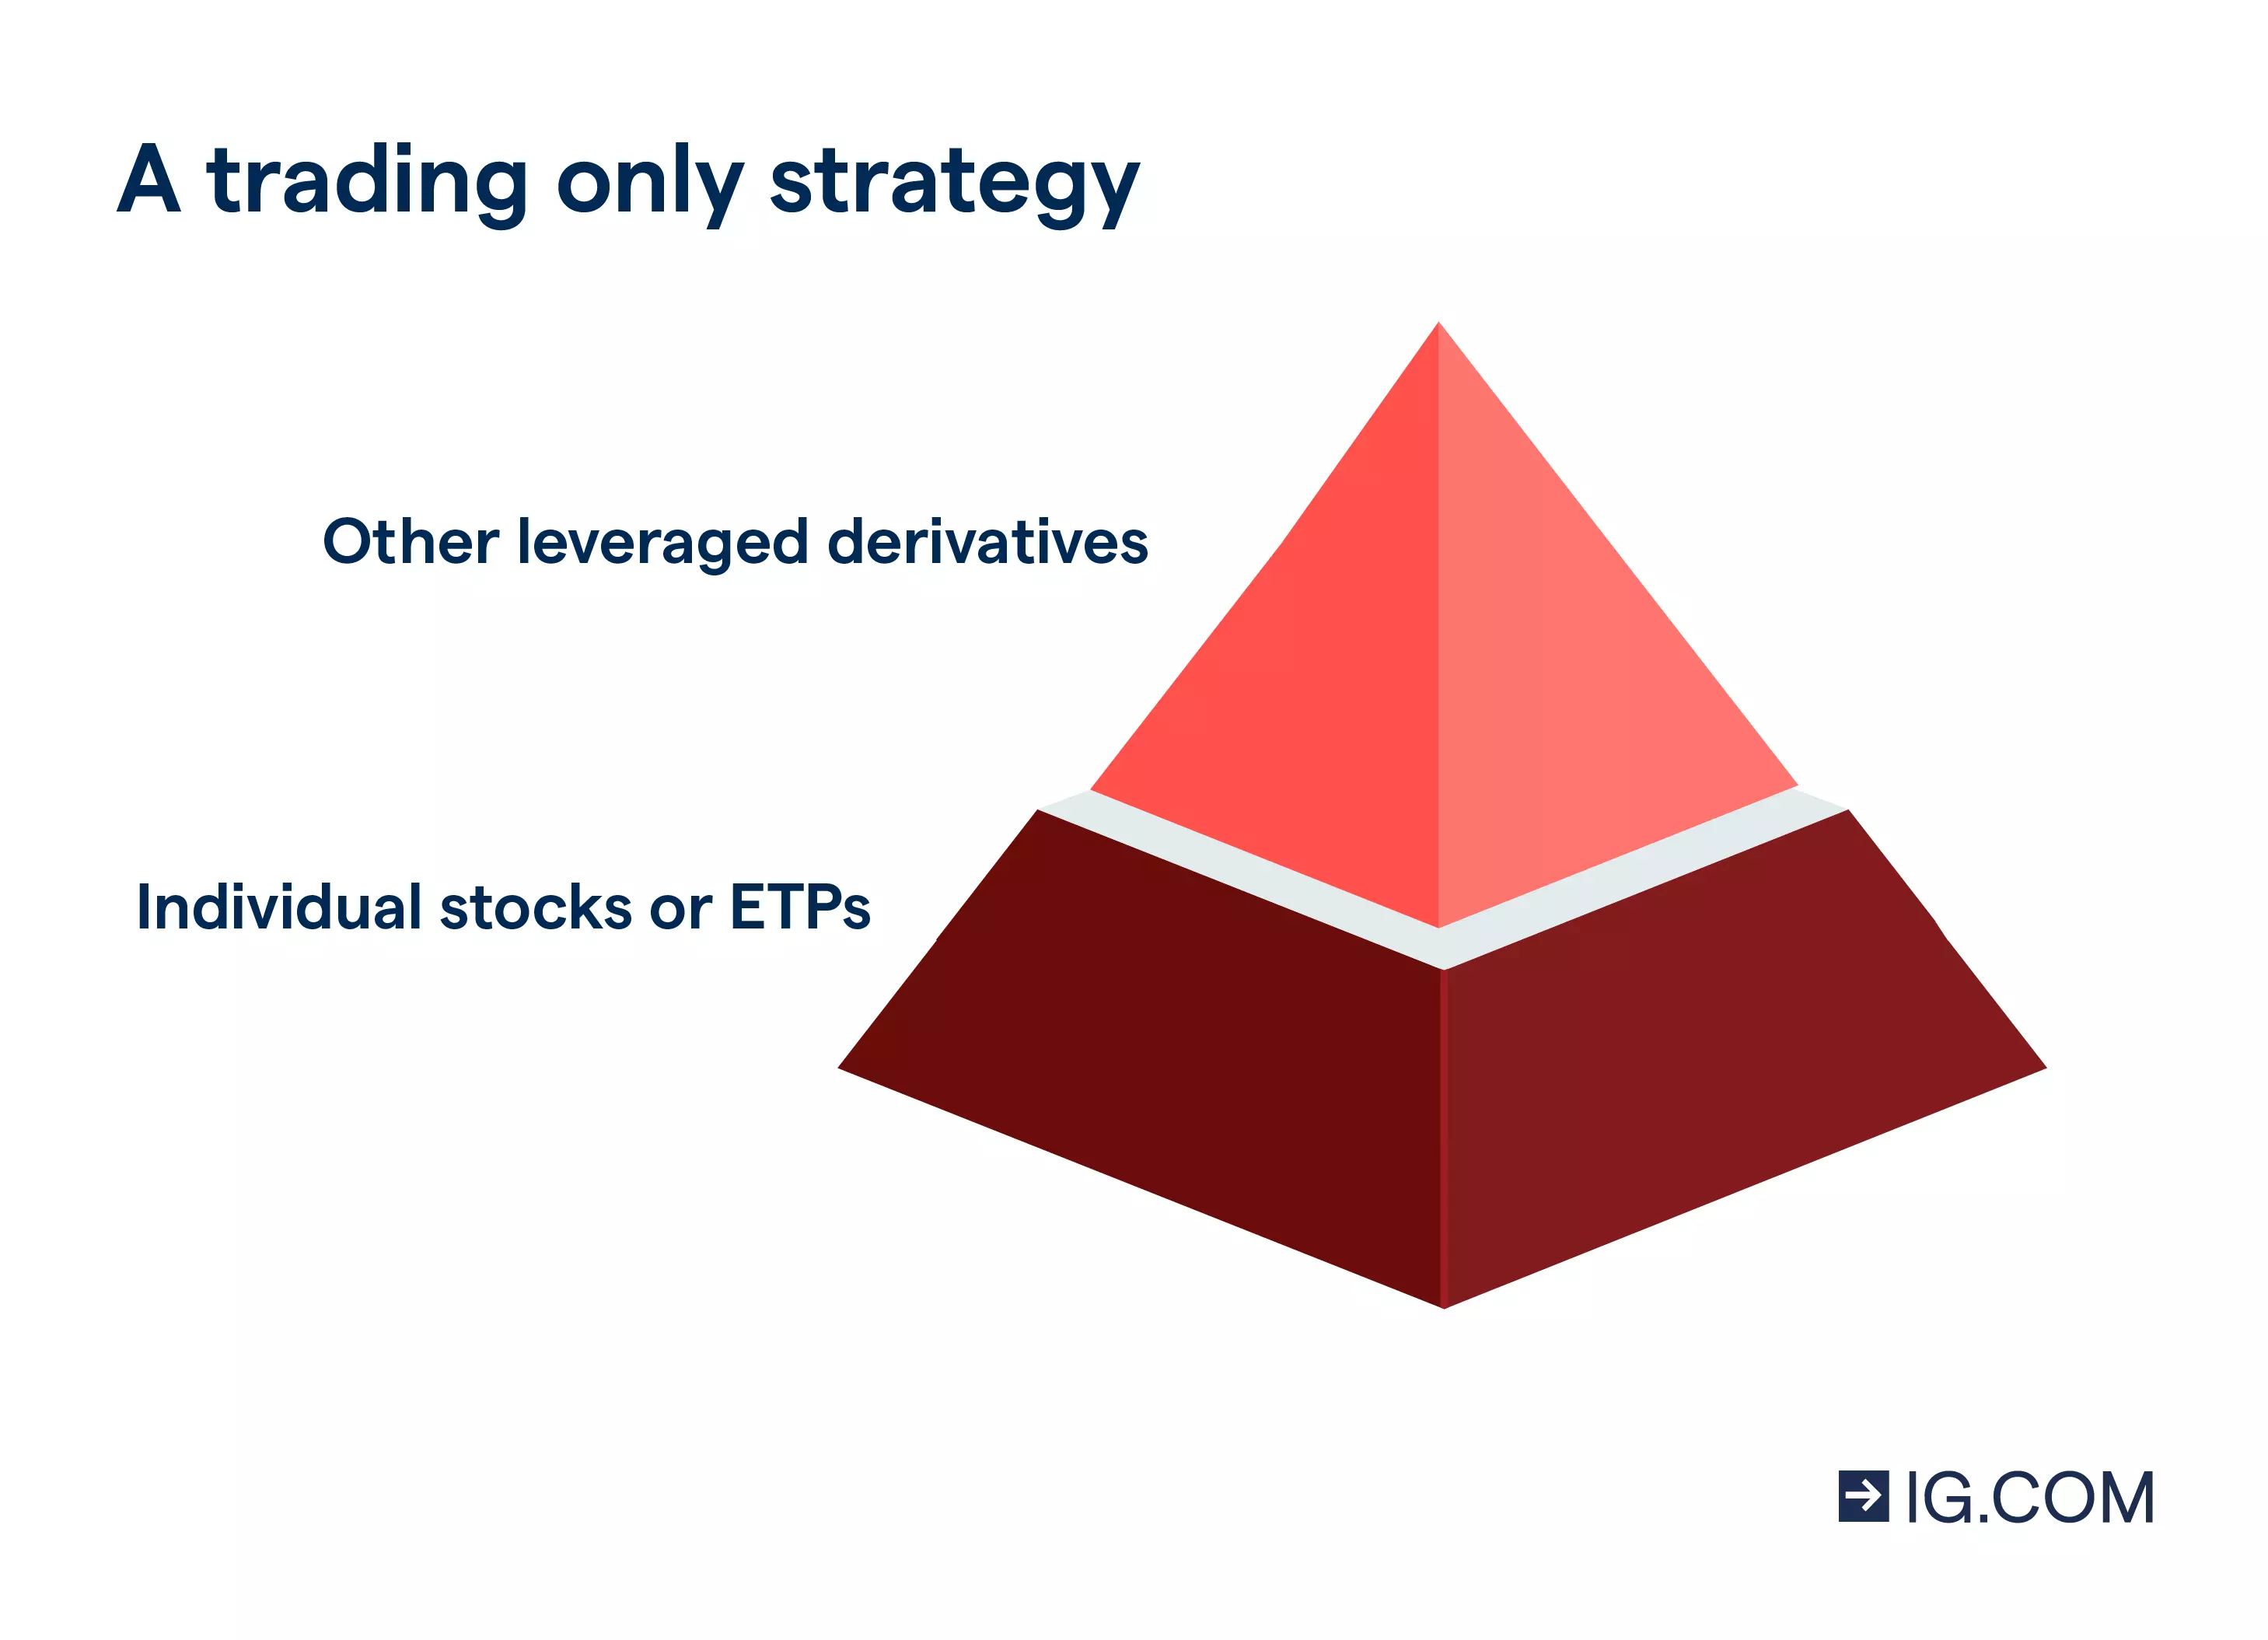 A diagram of a pyramid depicting a trading-only portfolio that combines different products.